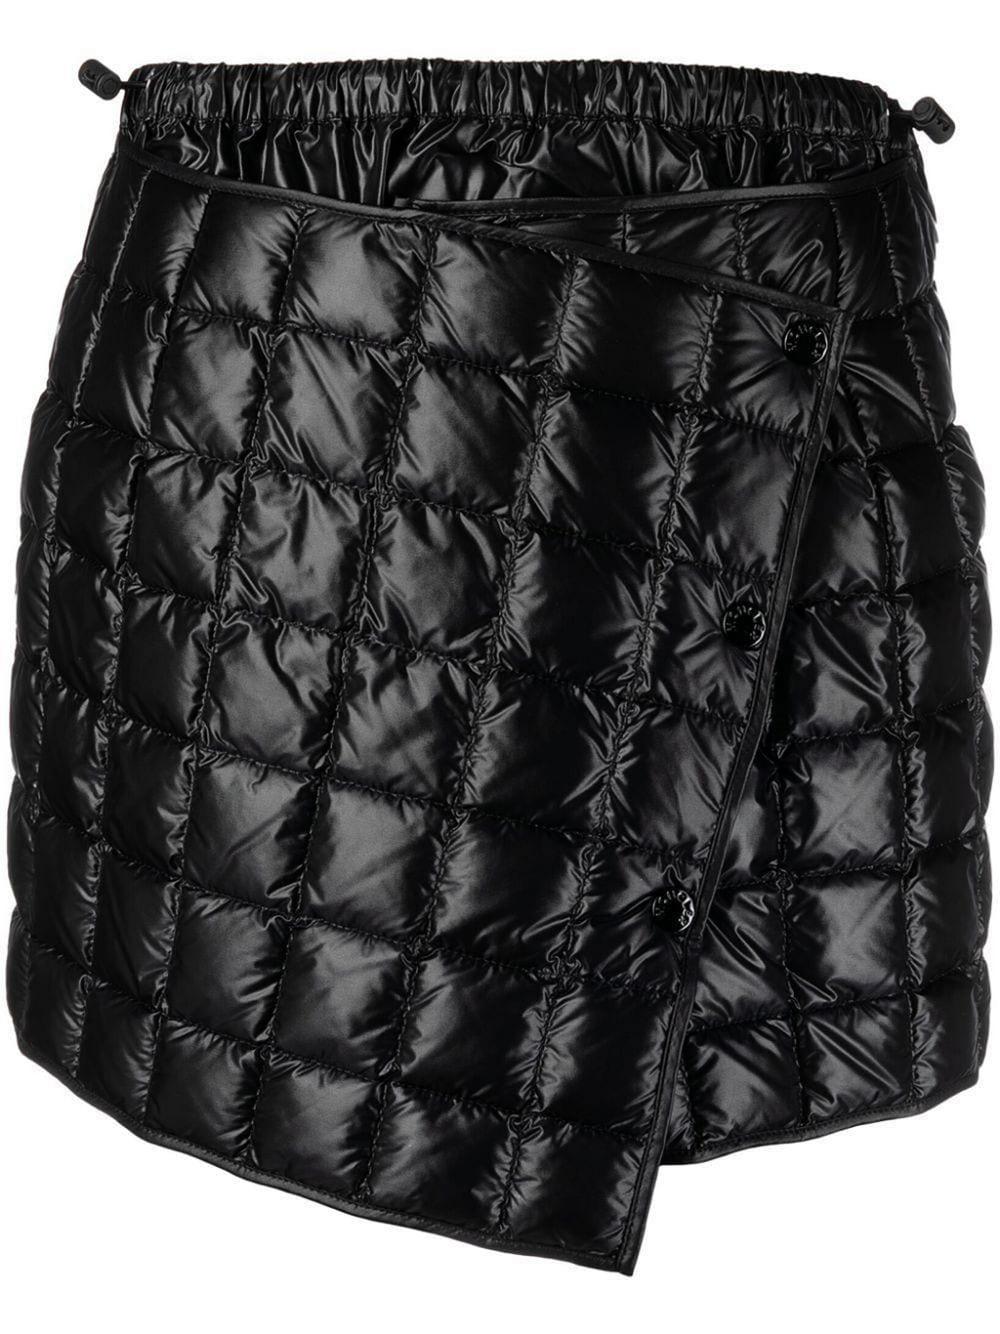 Moncler Quilted Asymmetric Mini Skirt in Black | Lyst